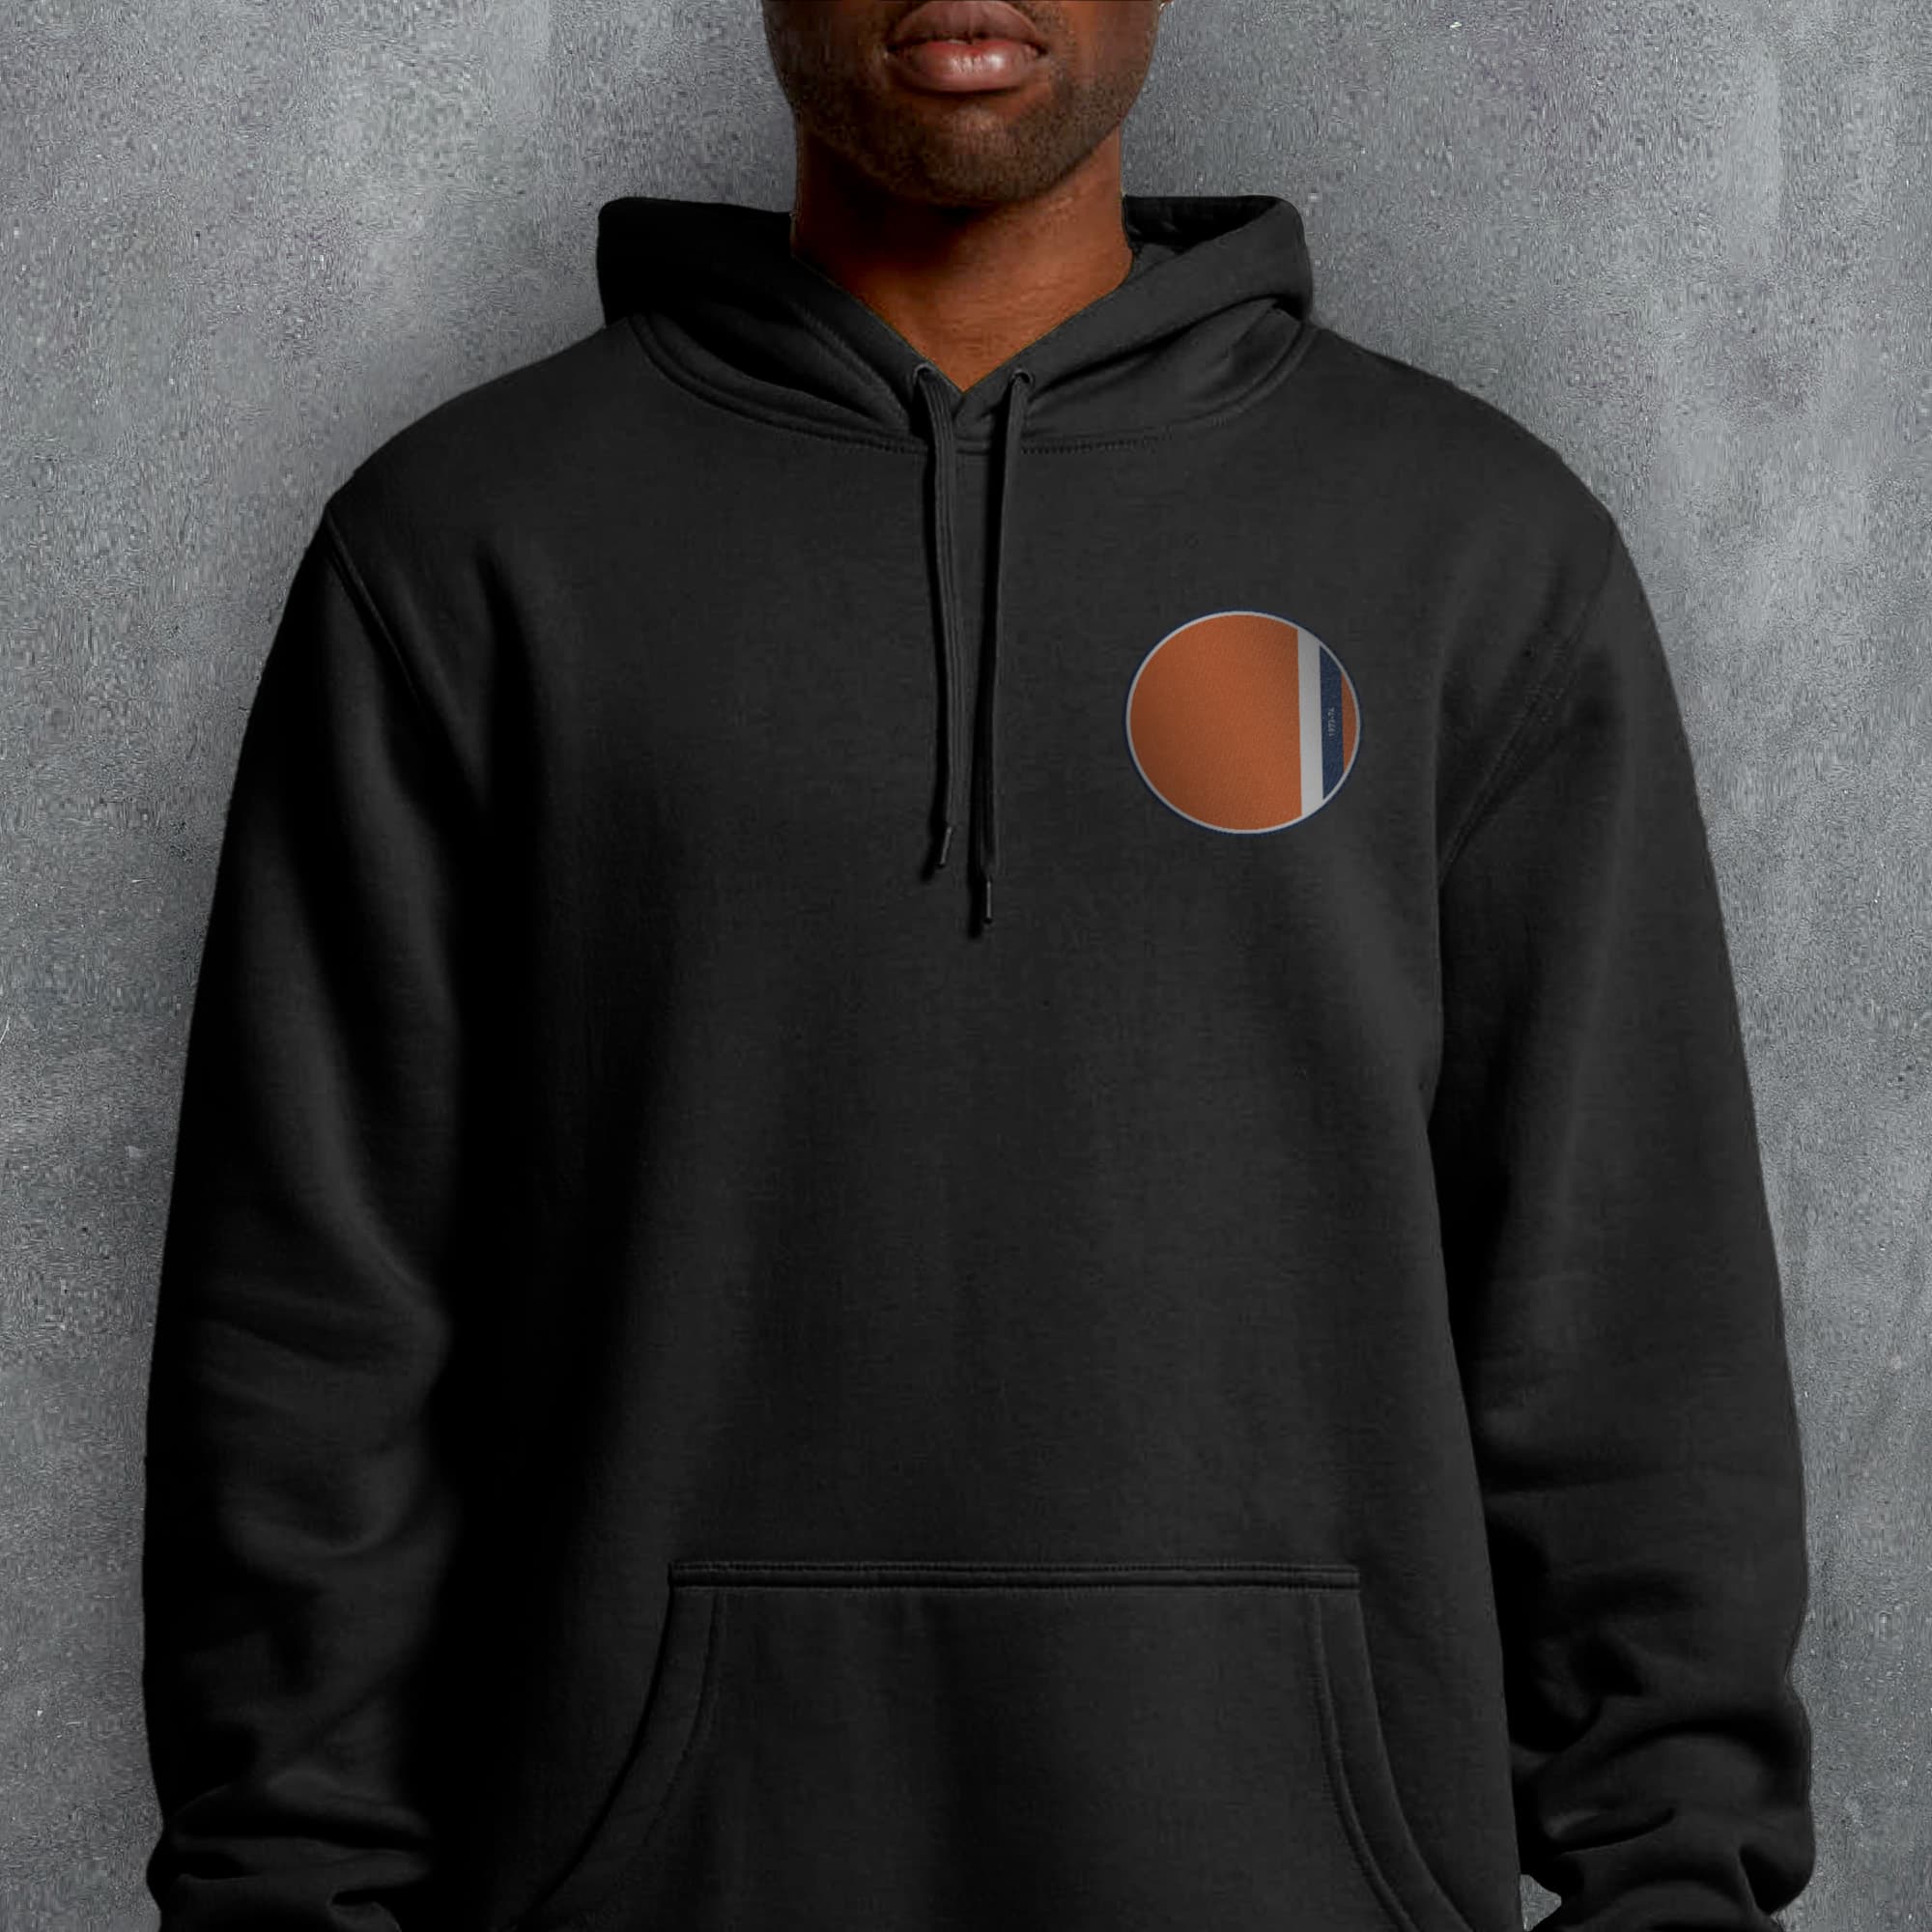 a man wearing a black hoodie with a brown circle on it